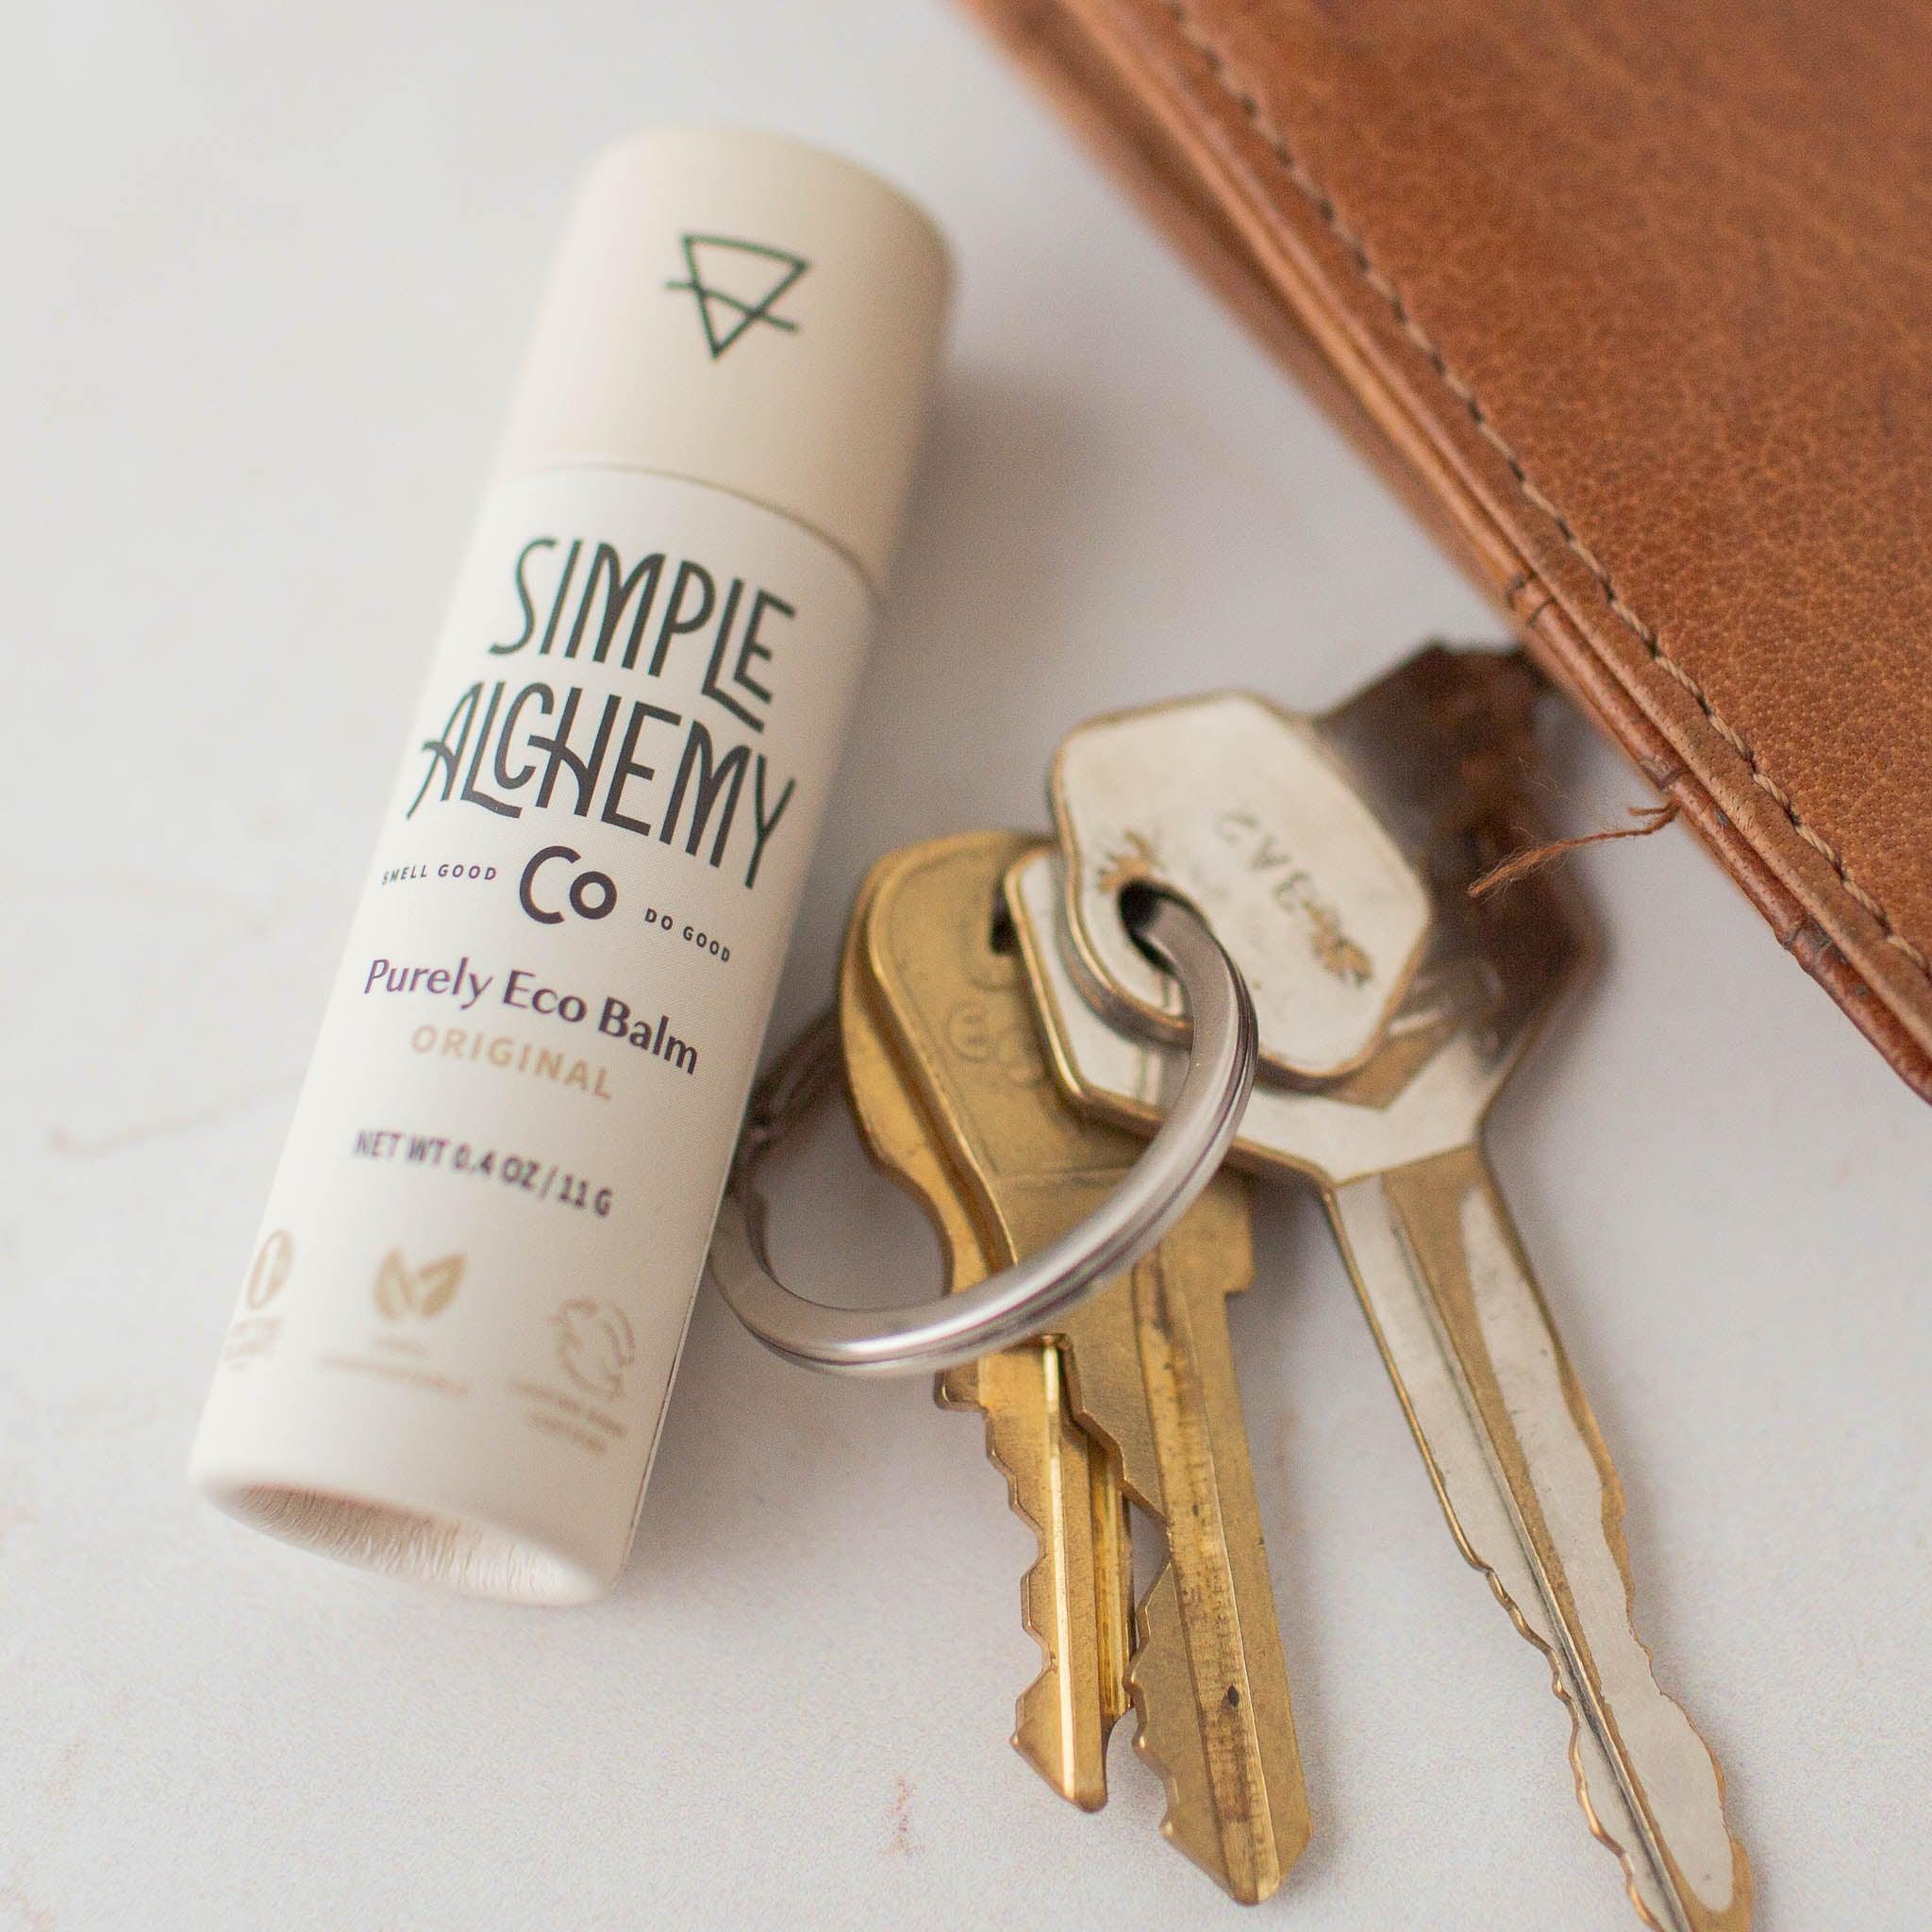 Off-white compostable paper tube of original vegan lip balm with keys and wallet.